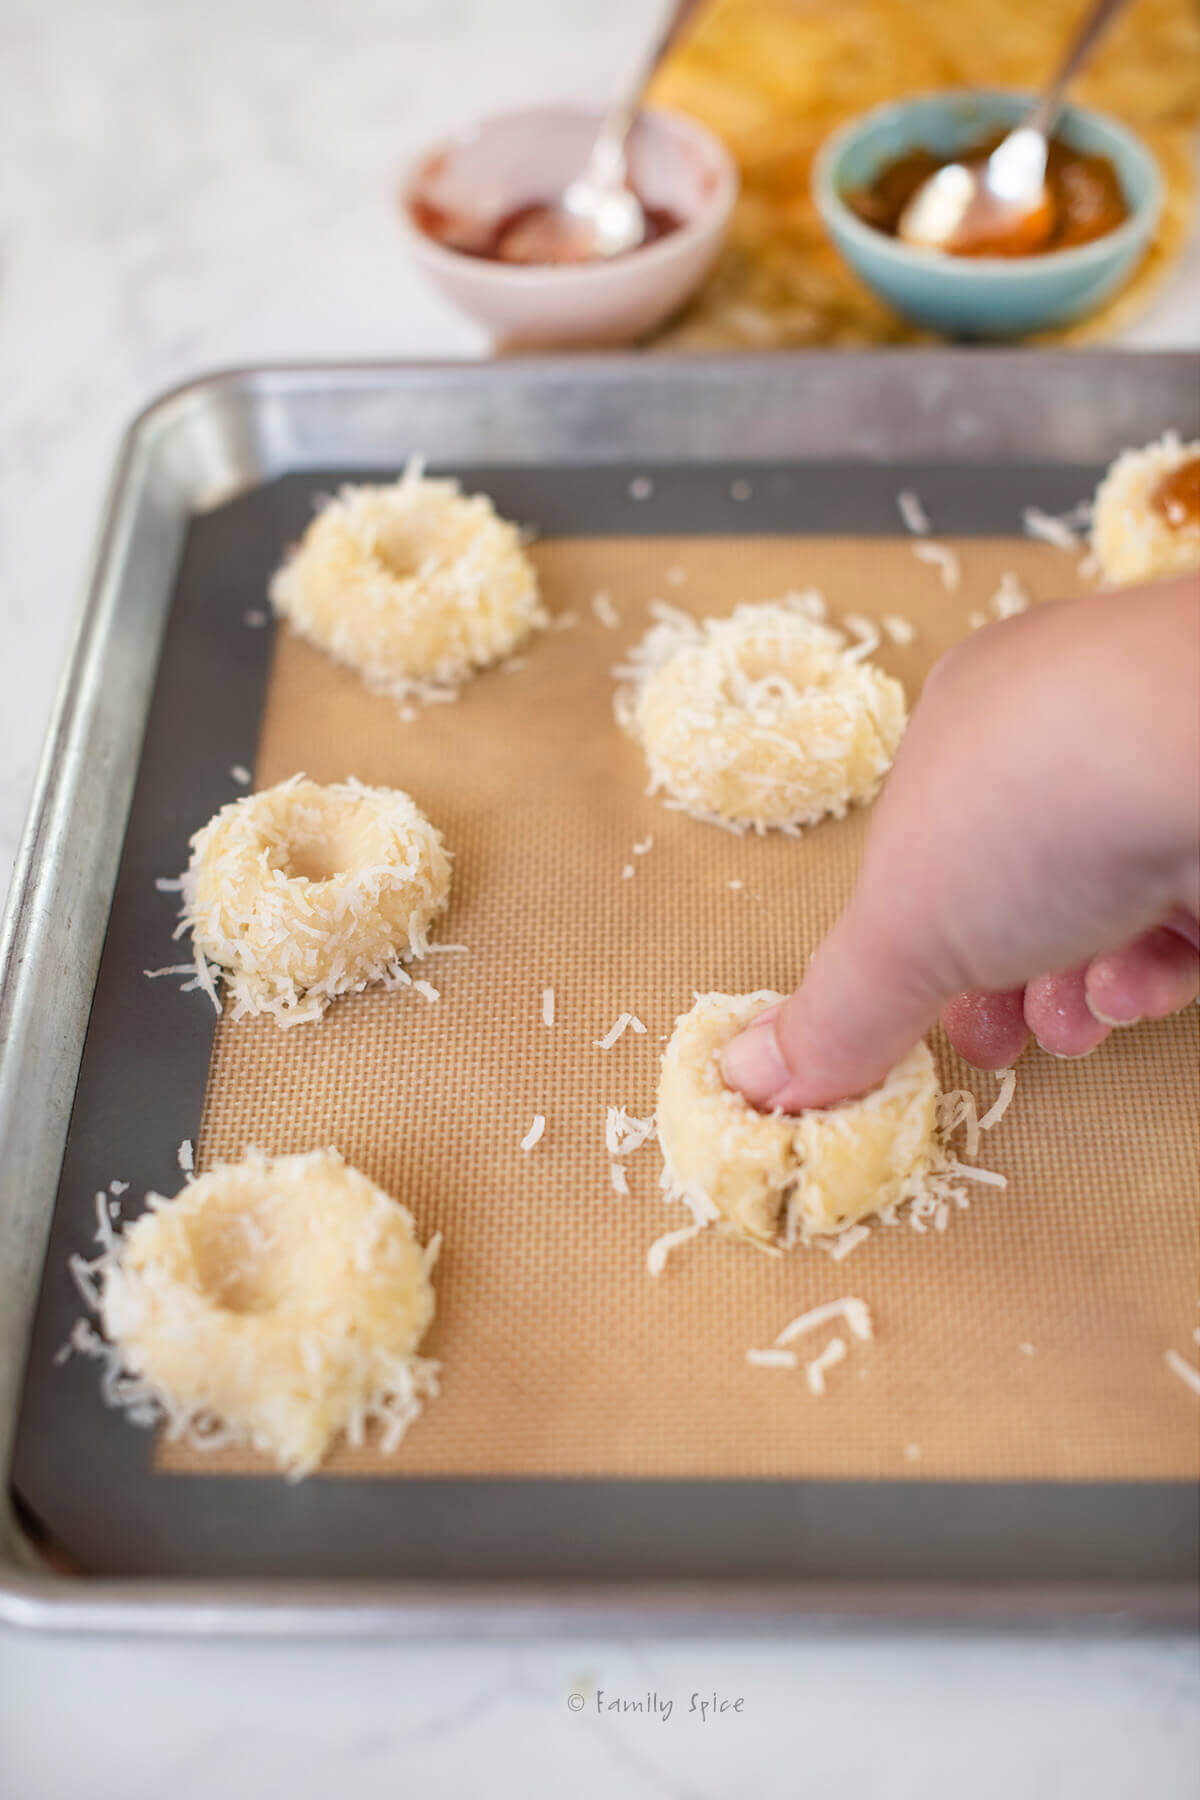 A hand pressing a thumb into cookies rolled in coconut on a baking sheet